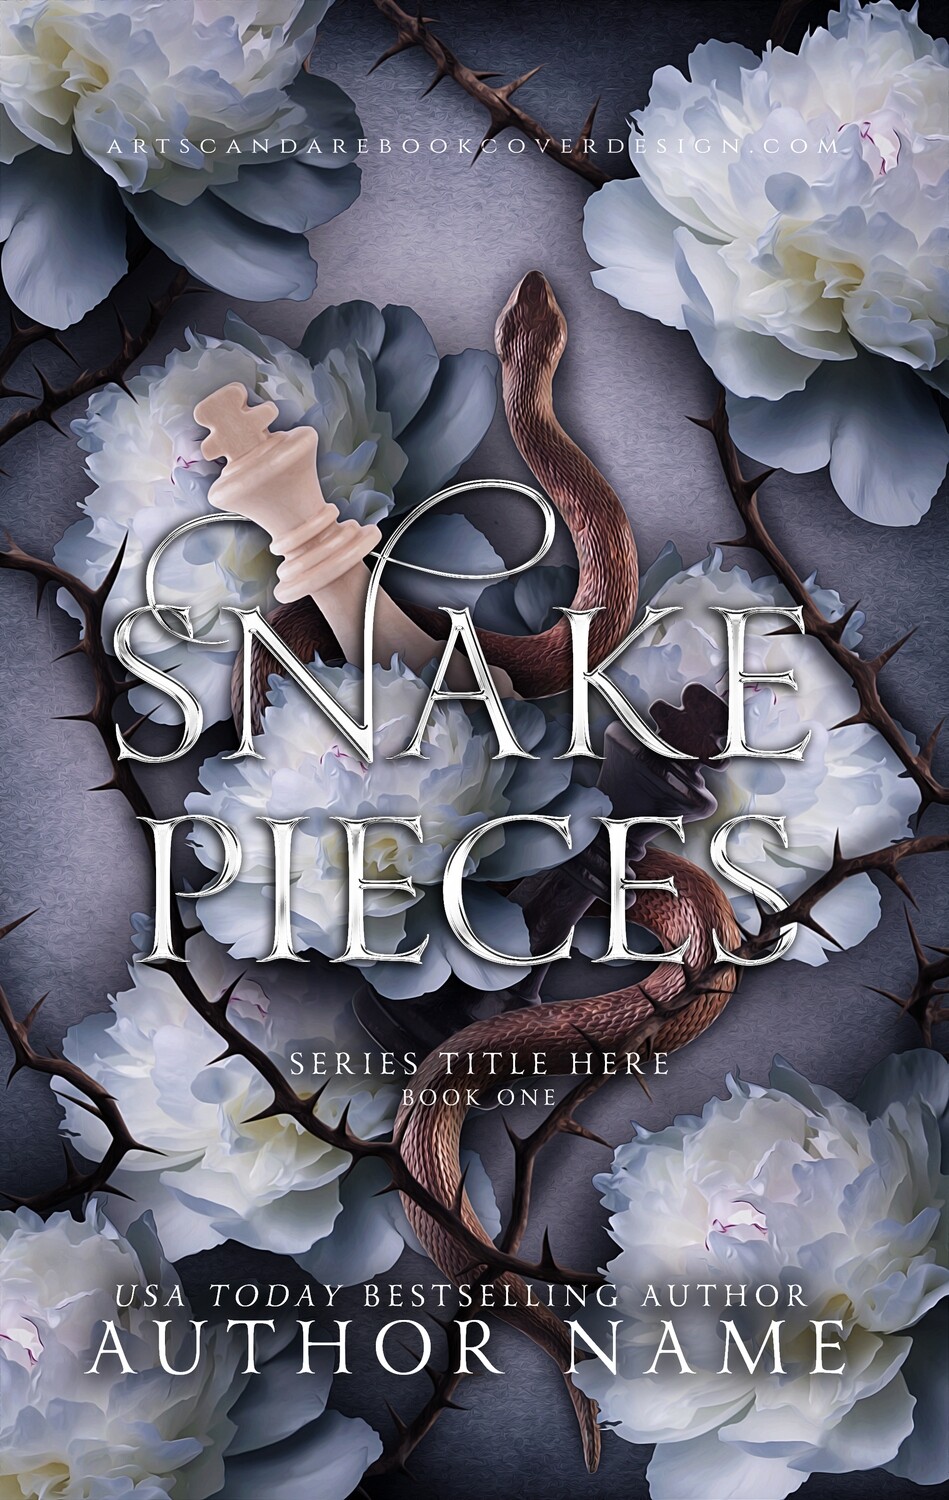 SNAKE PIECES